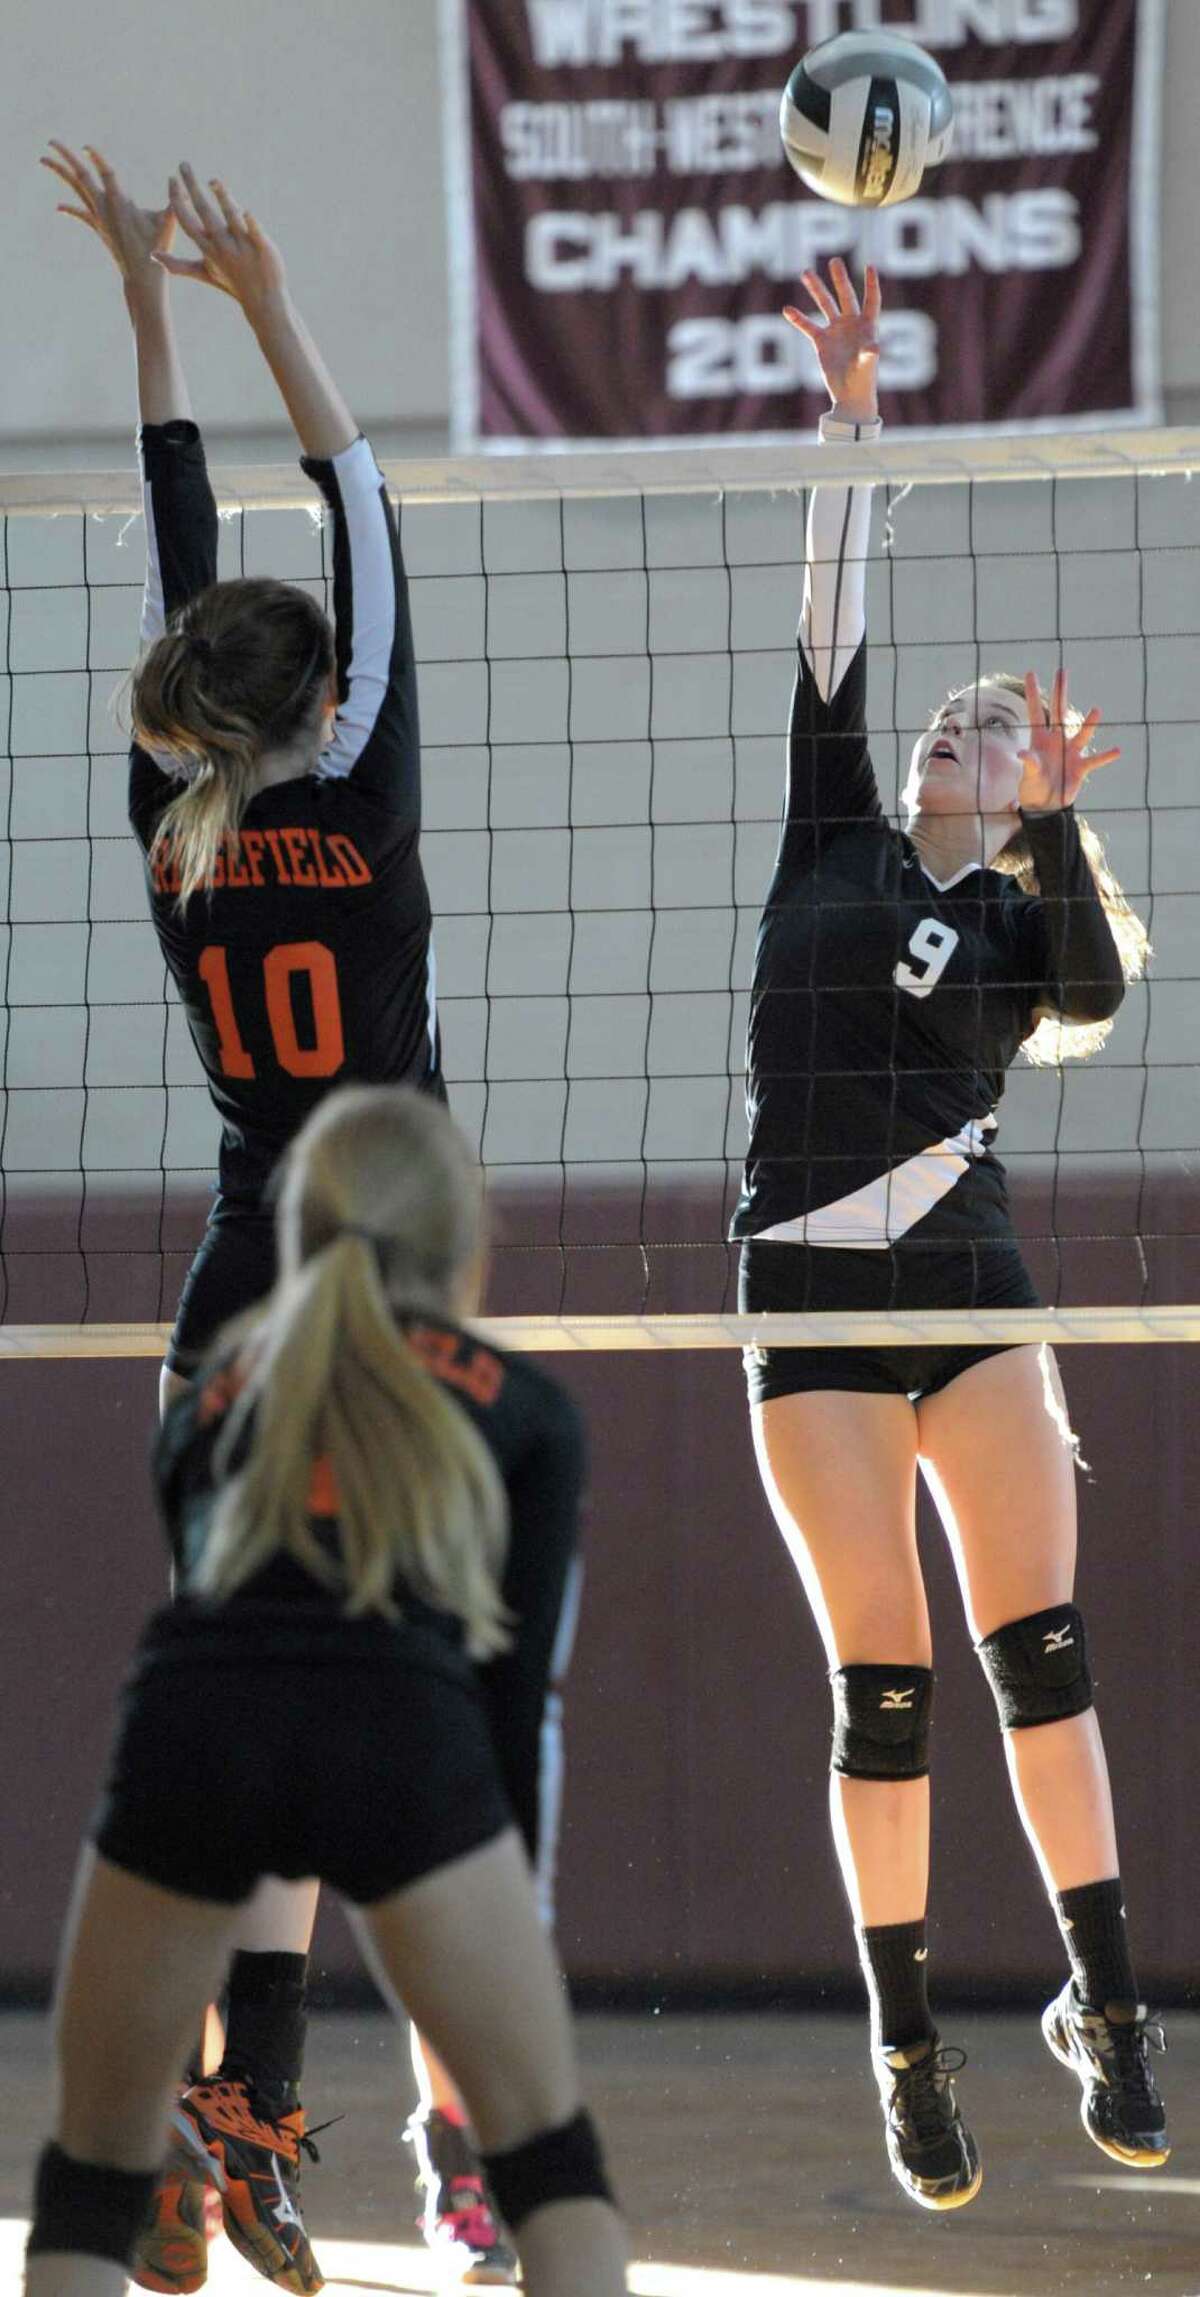 Bethel's Jessy Demment (9) goes to tap the ball over the net as Ridgefield's Sydney Carroll (10) goes for the block in the girls high school volleyball game between Ridgefield and Bethel high schools on Wednesday afternoon, September 16, 2015, in Bethel, Conn.